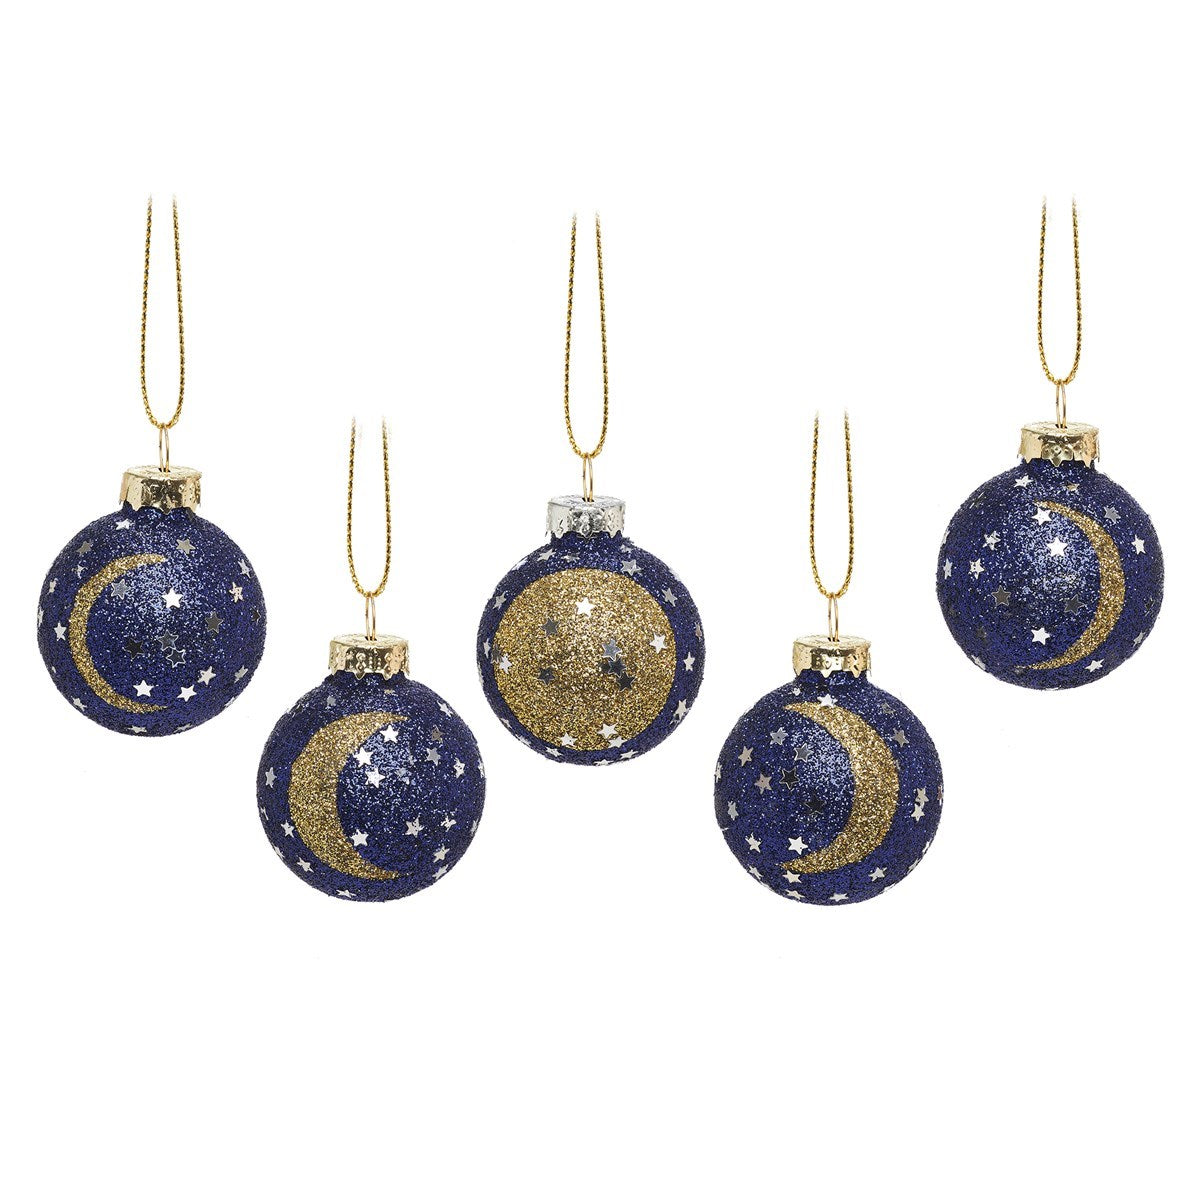 PHASES OF THE MOON MINI BAUBLE SET OF 4